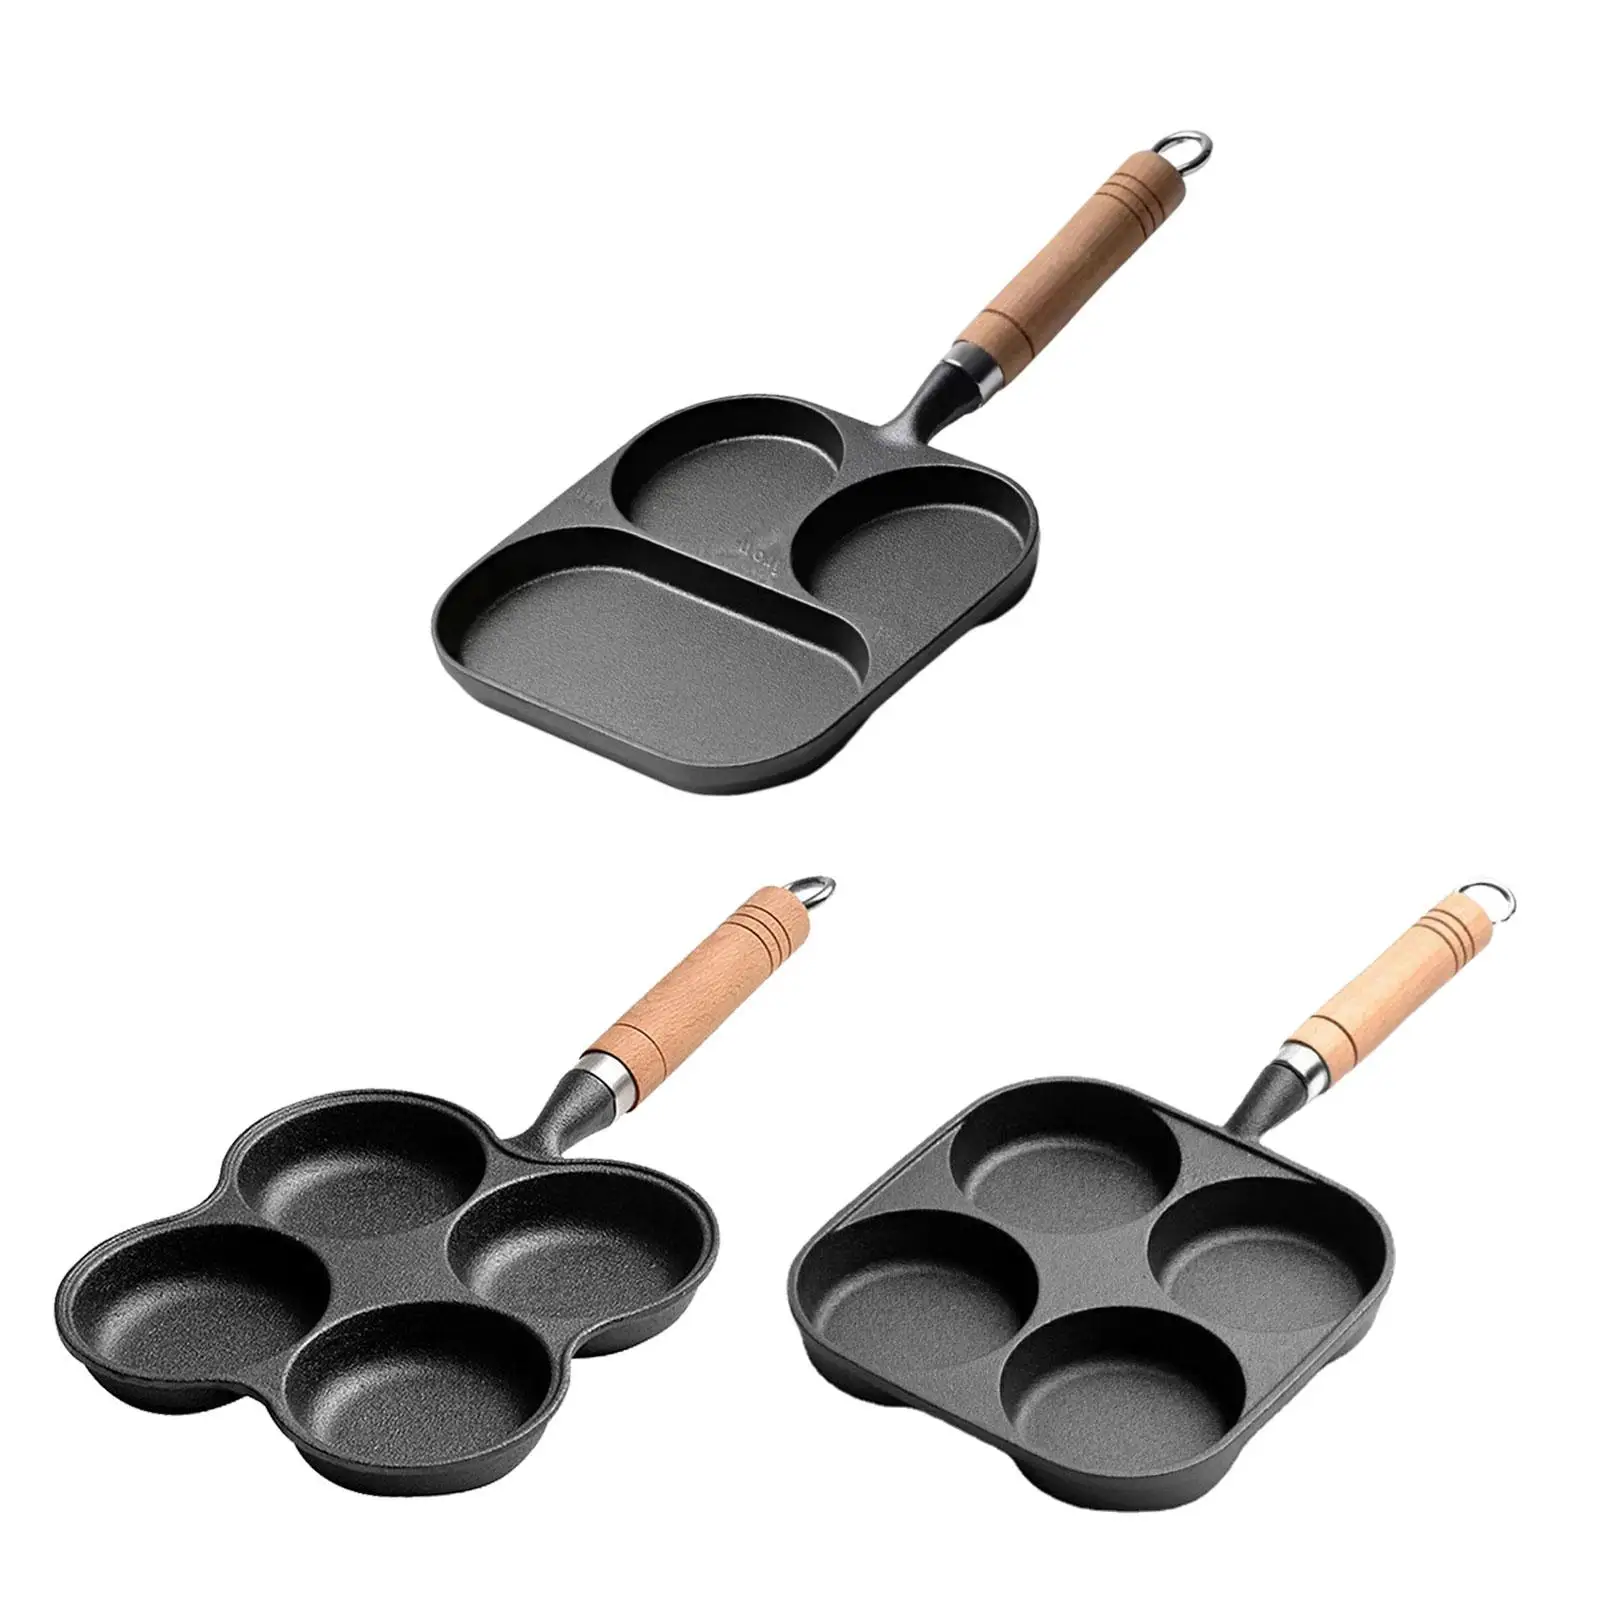 Divided Frying Pan Suitable for Gas and Induction Cooker Cookware Skillet Nonstick Frying Pan Egg Frying Pan for Omelet Burger